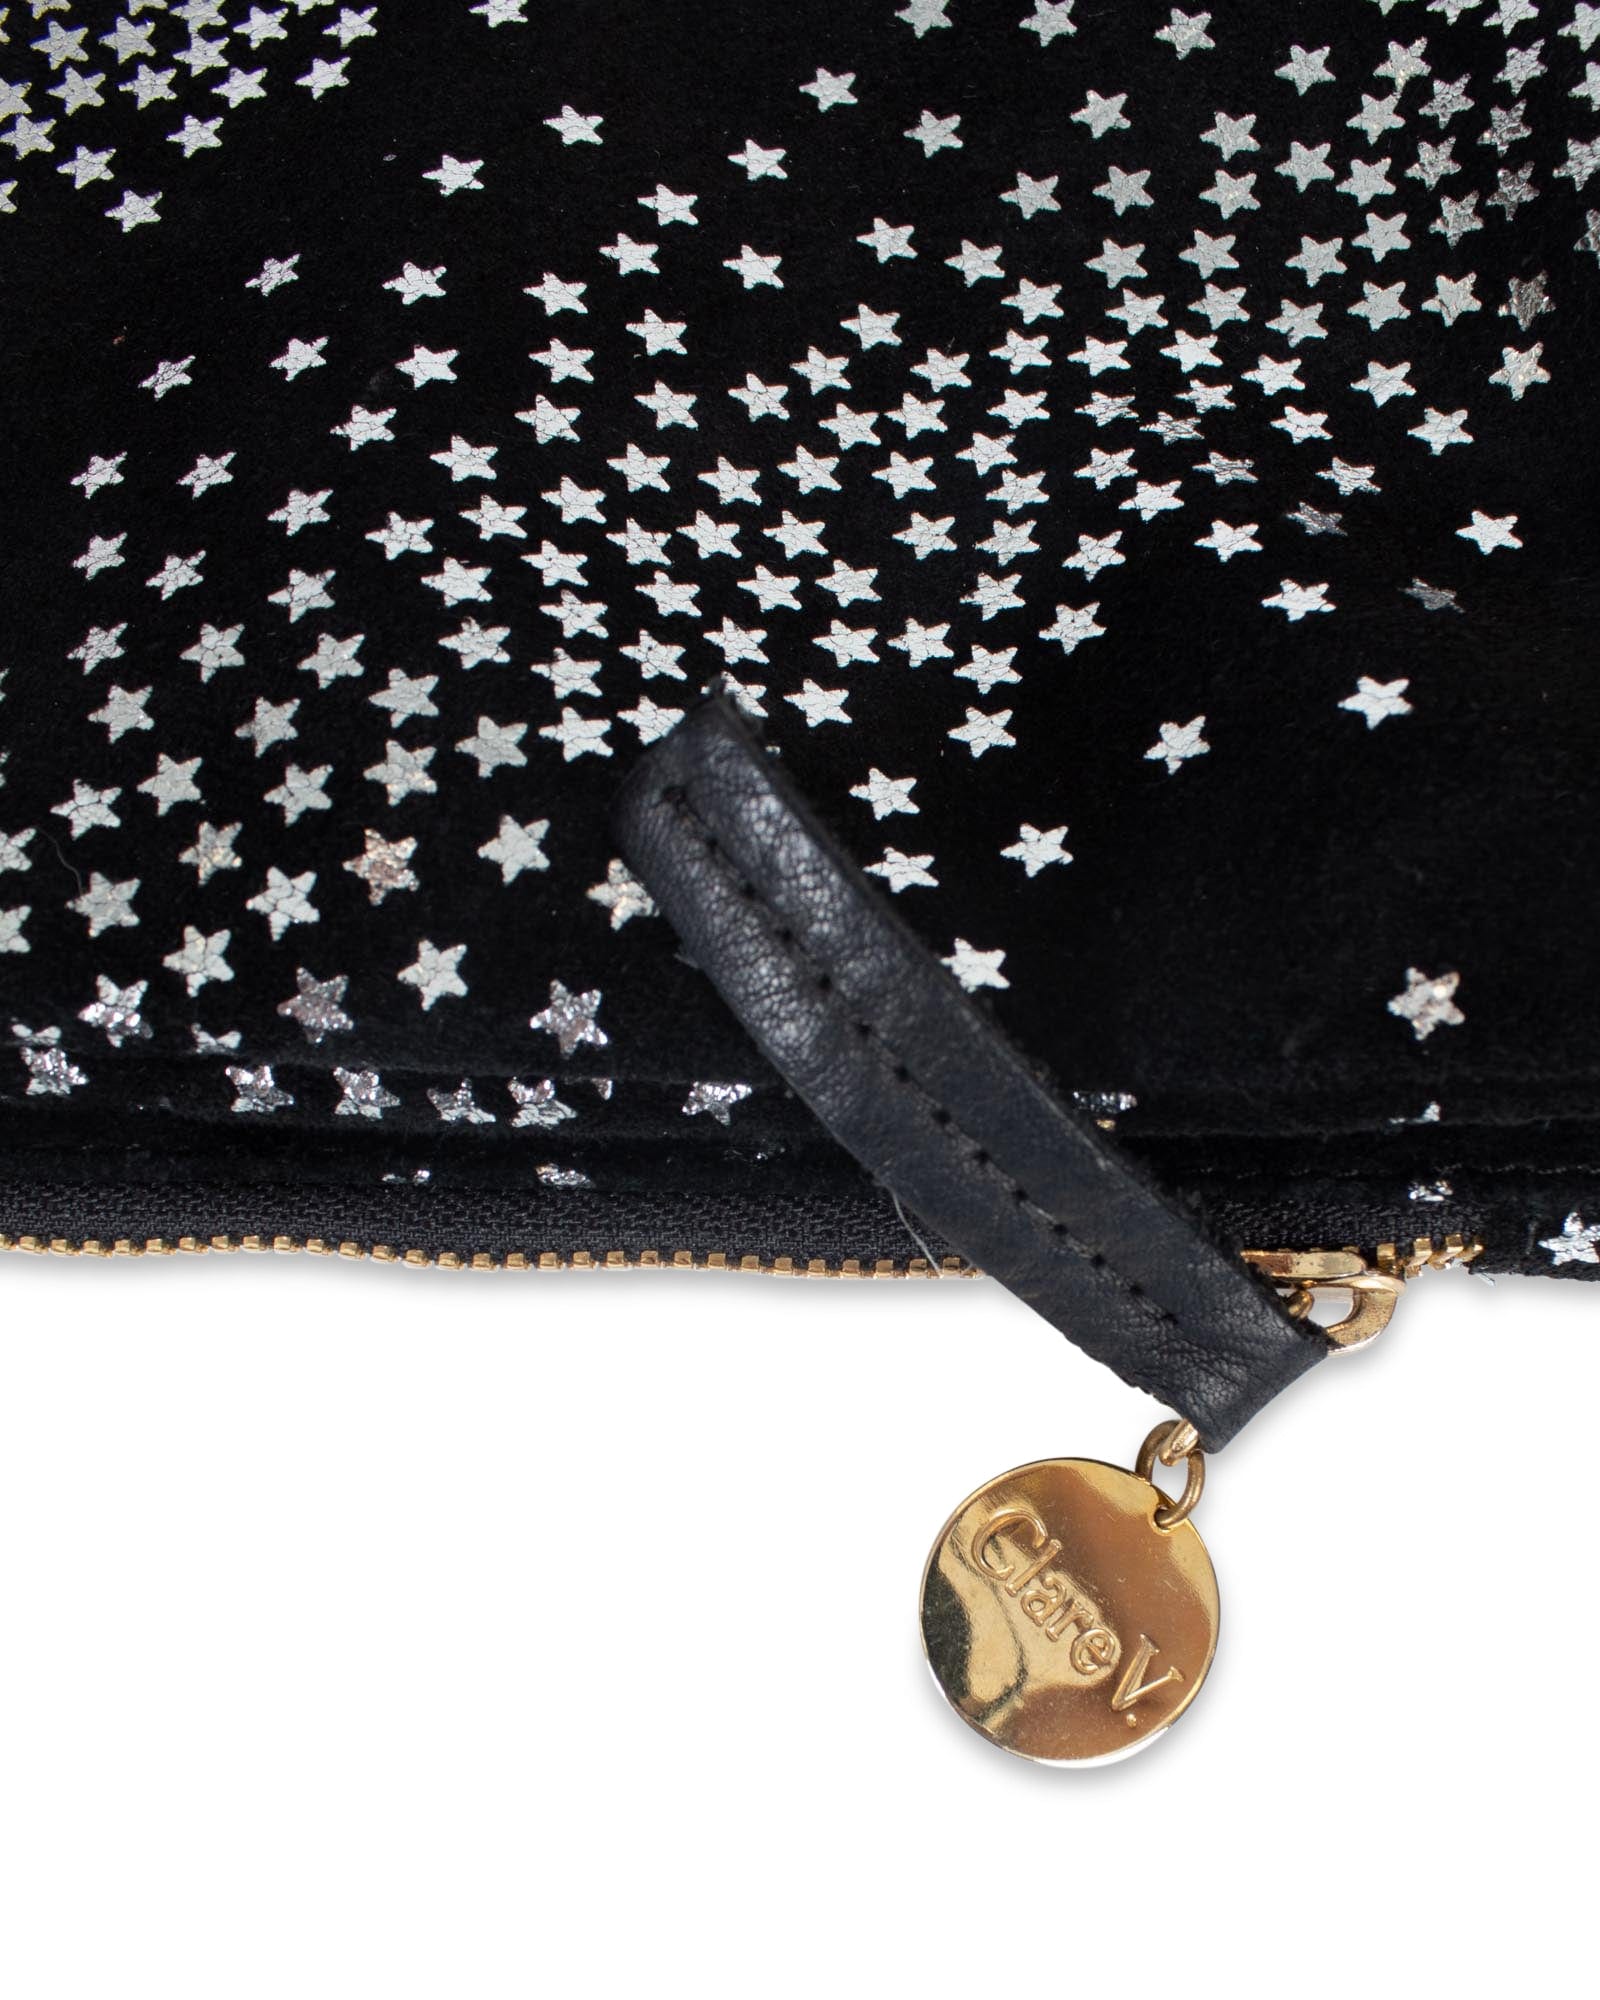 Clare V Authenticated Leather Clutch Bag